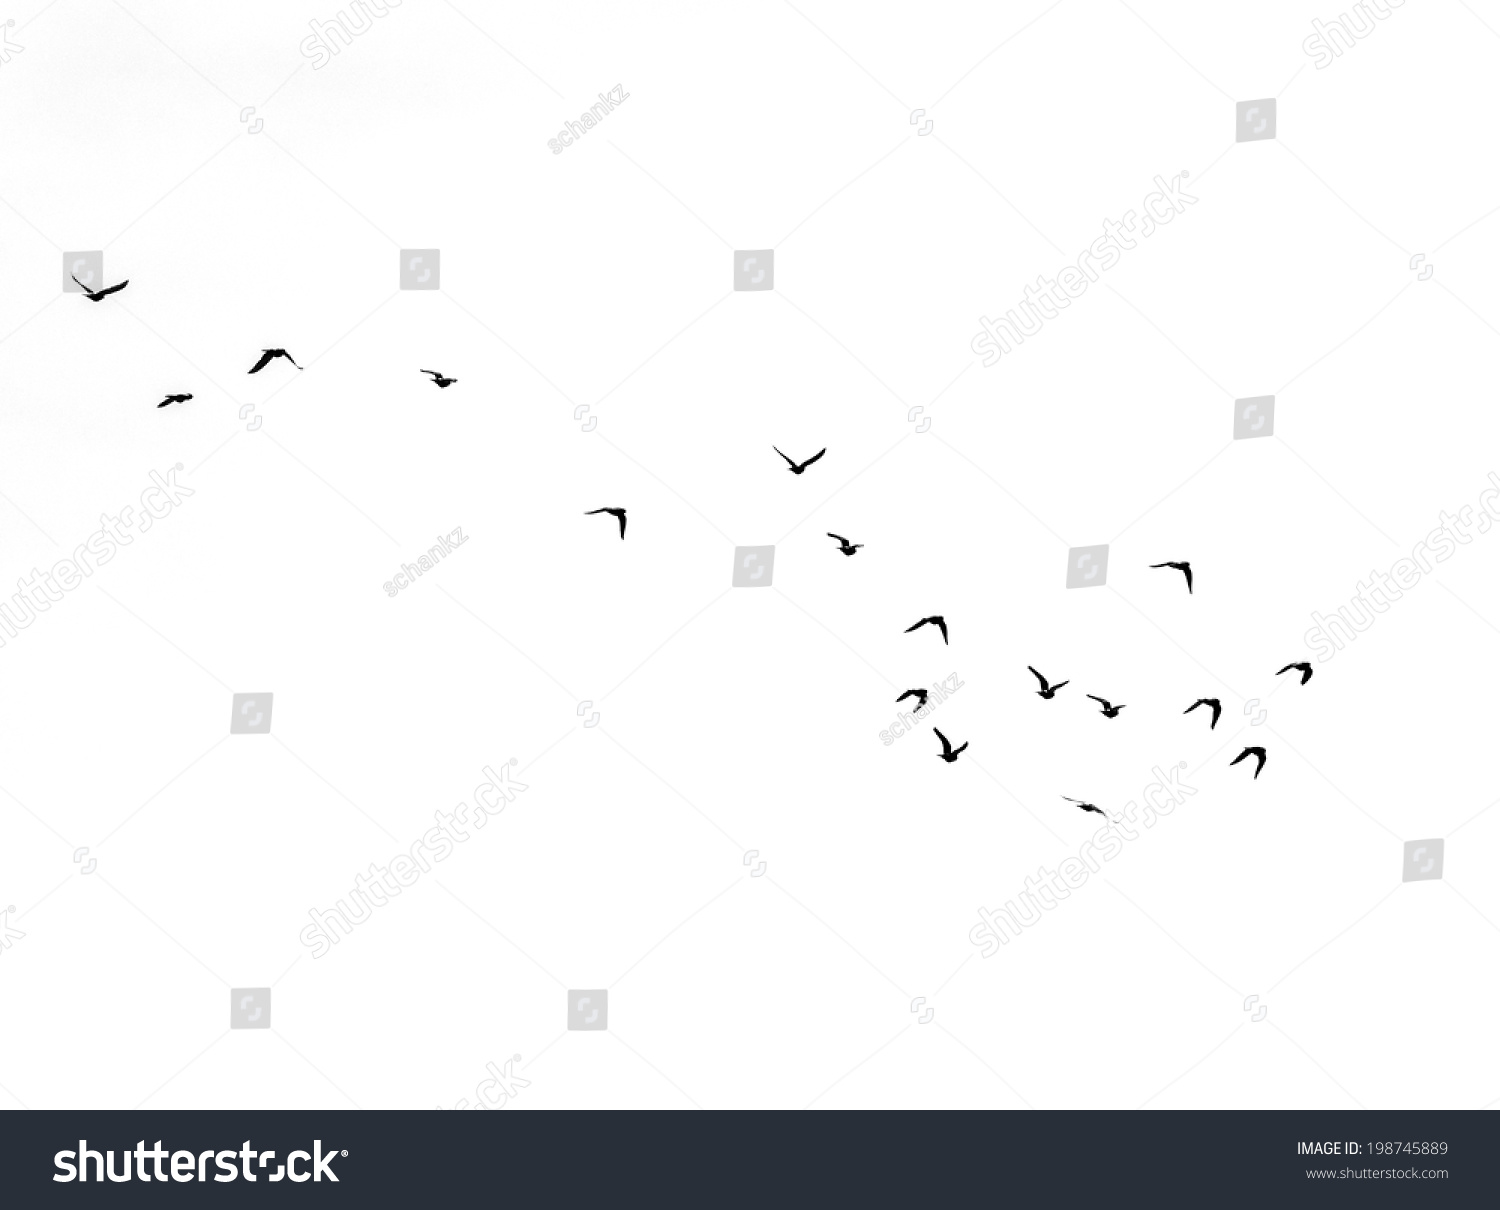 Flock Of Birds On A White Background Stock Photo 198745889 : Shutterstock